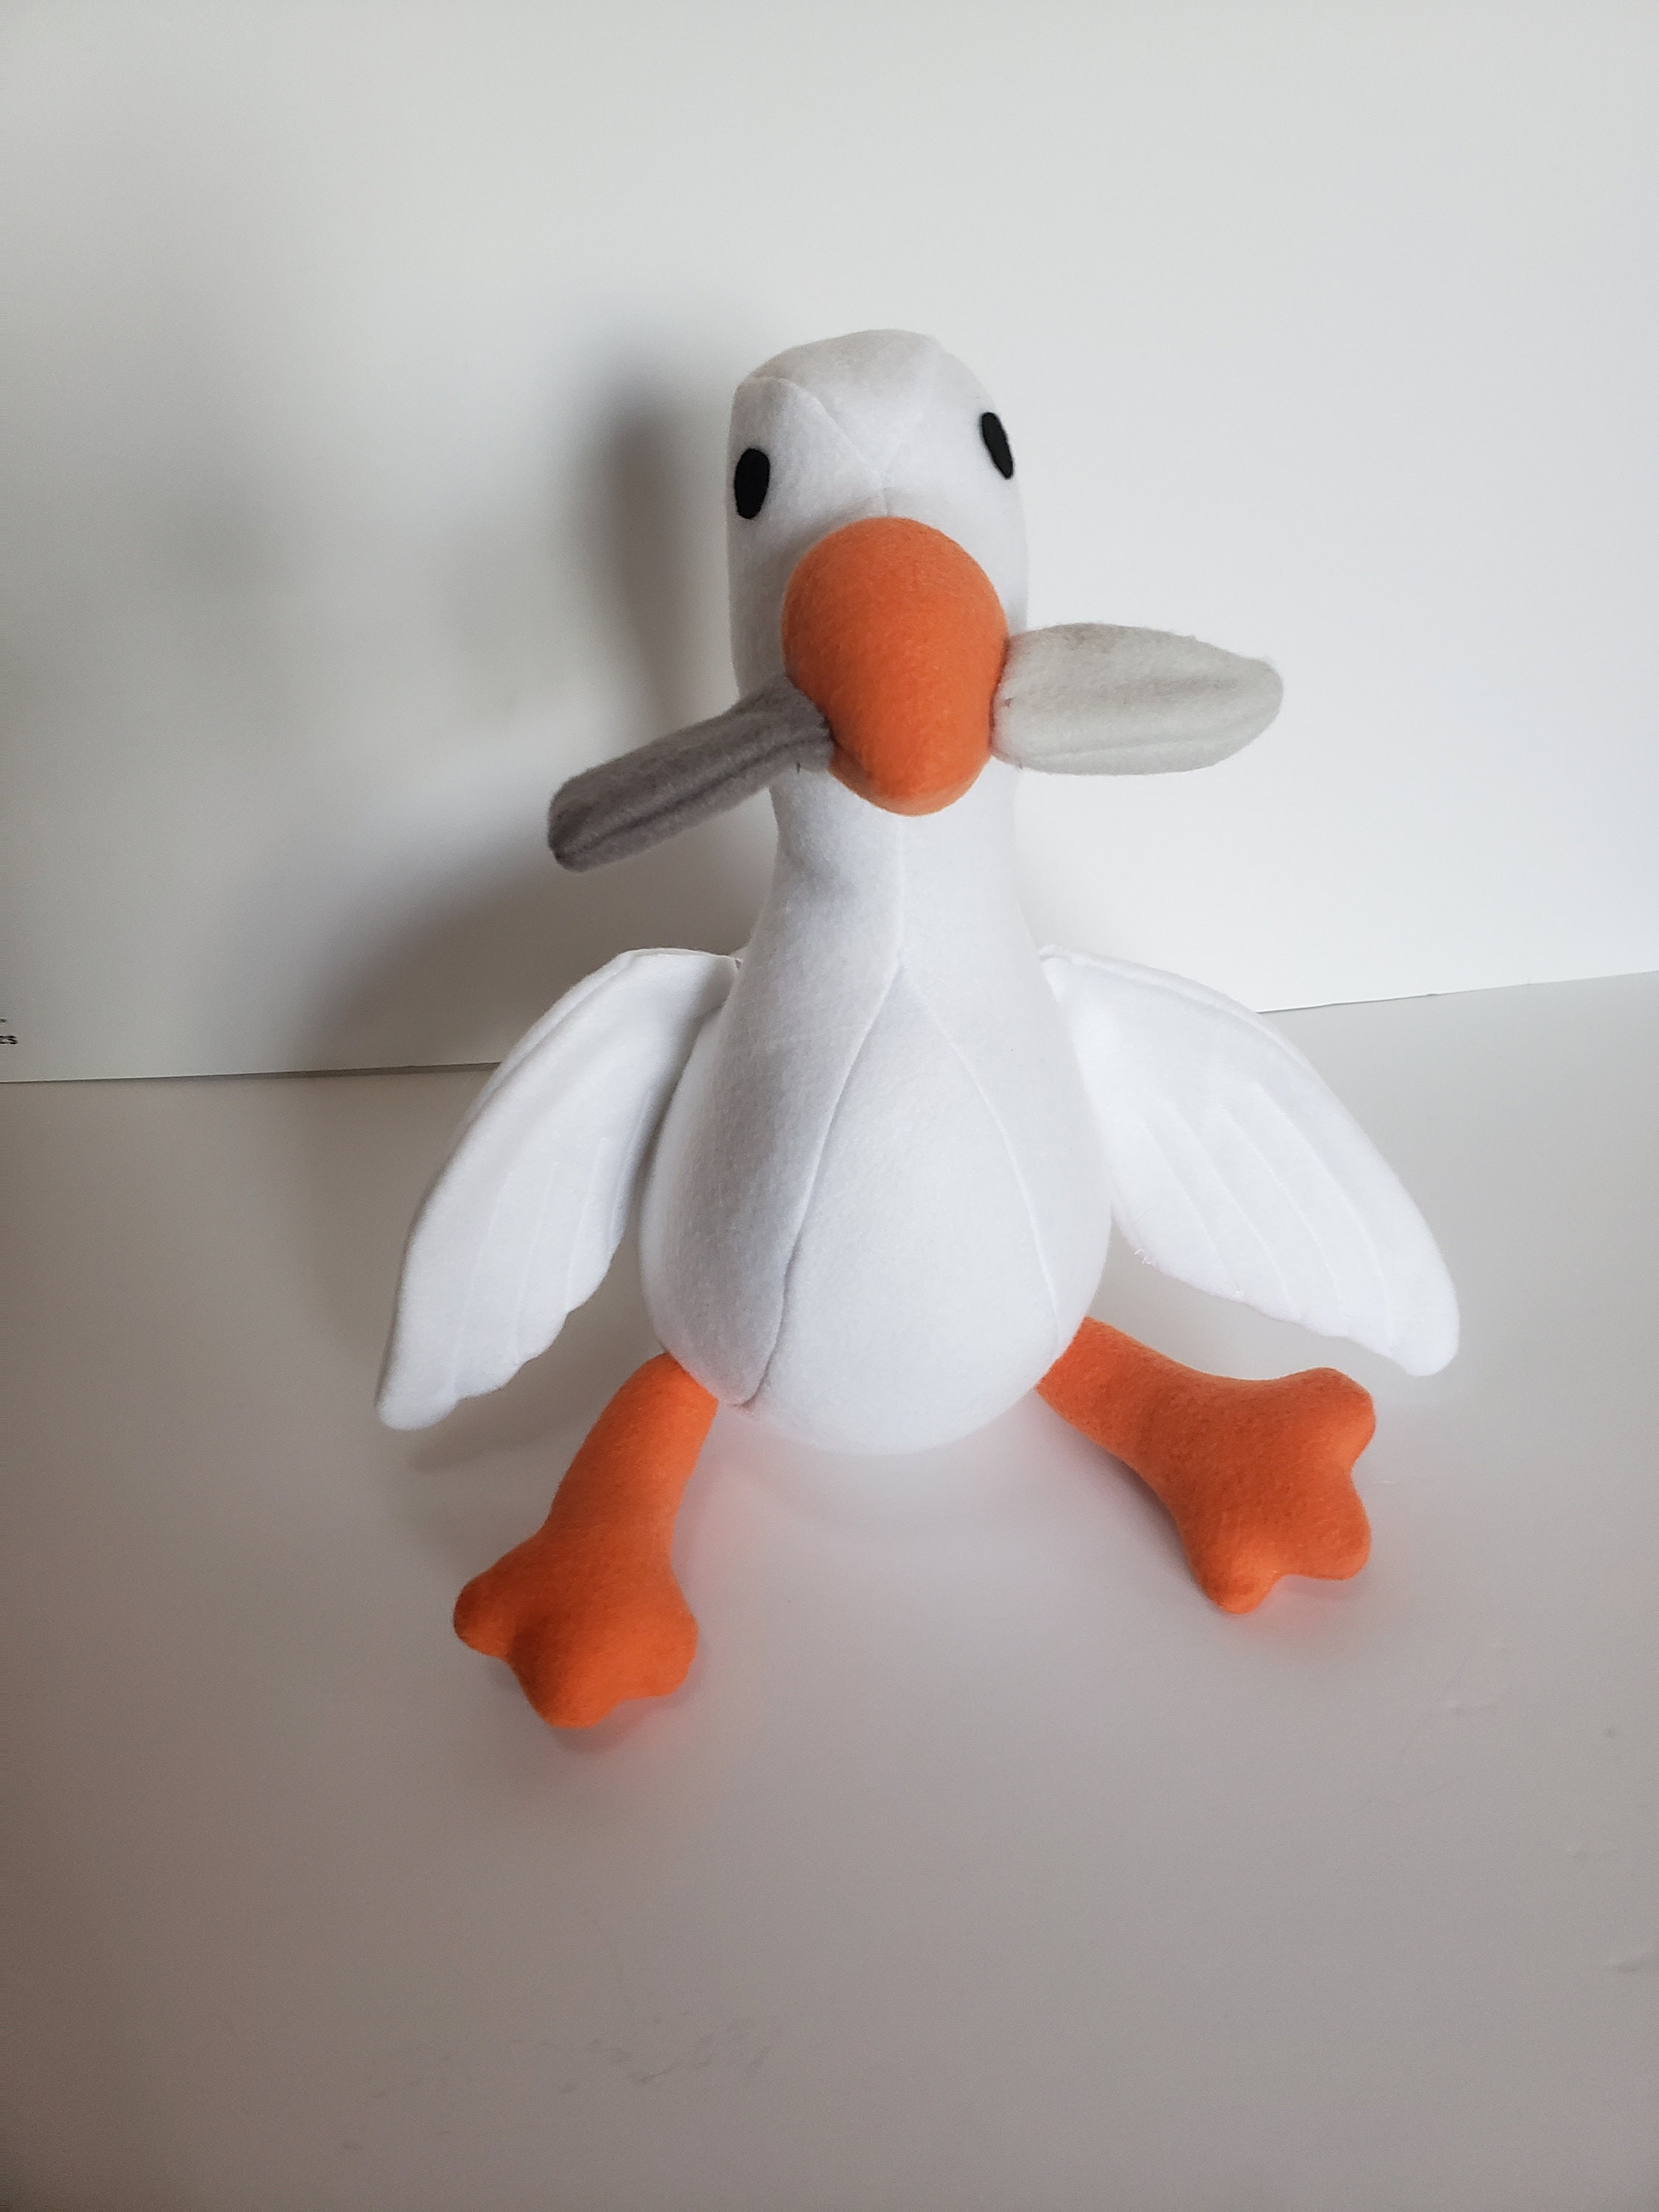  ZCPACE Untitled Goose Game Plush Figure Animal Soft